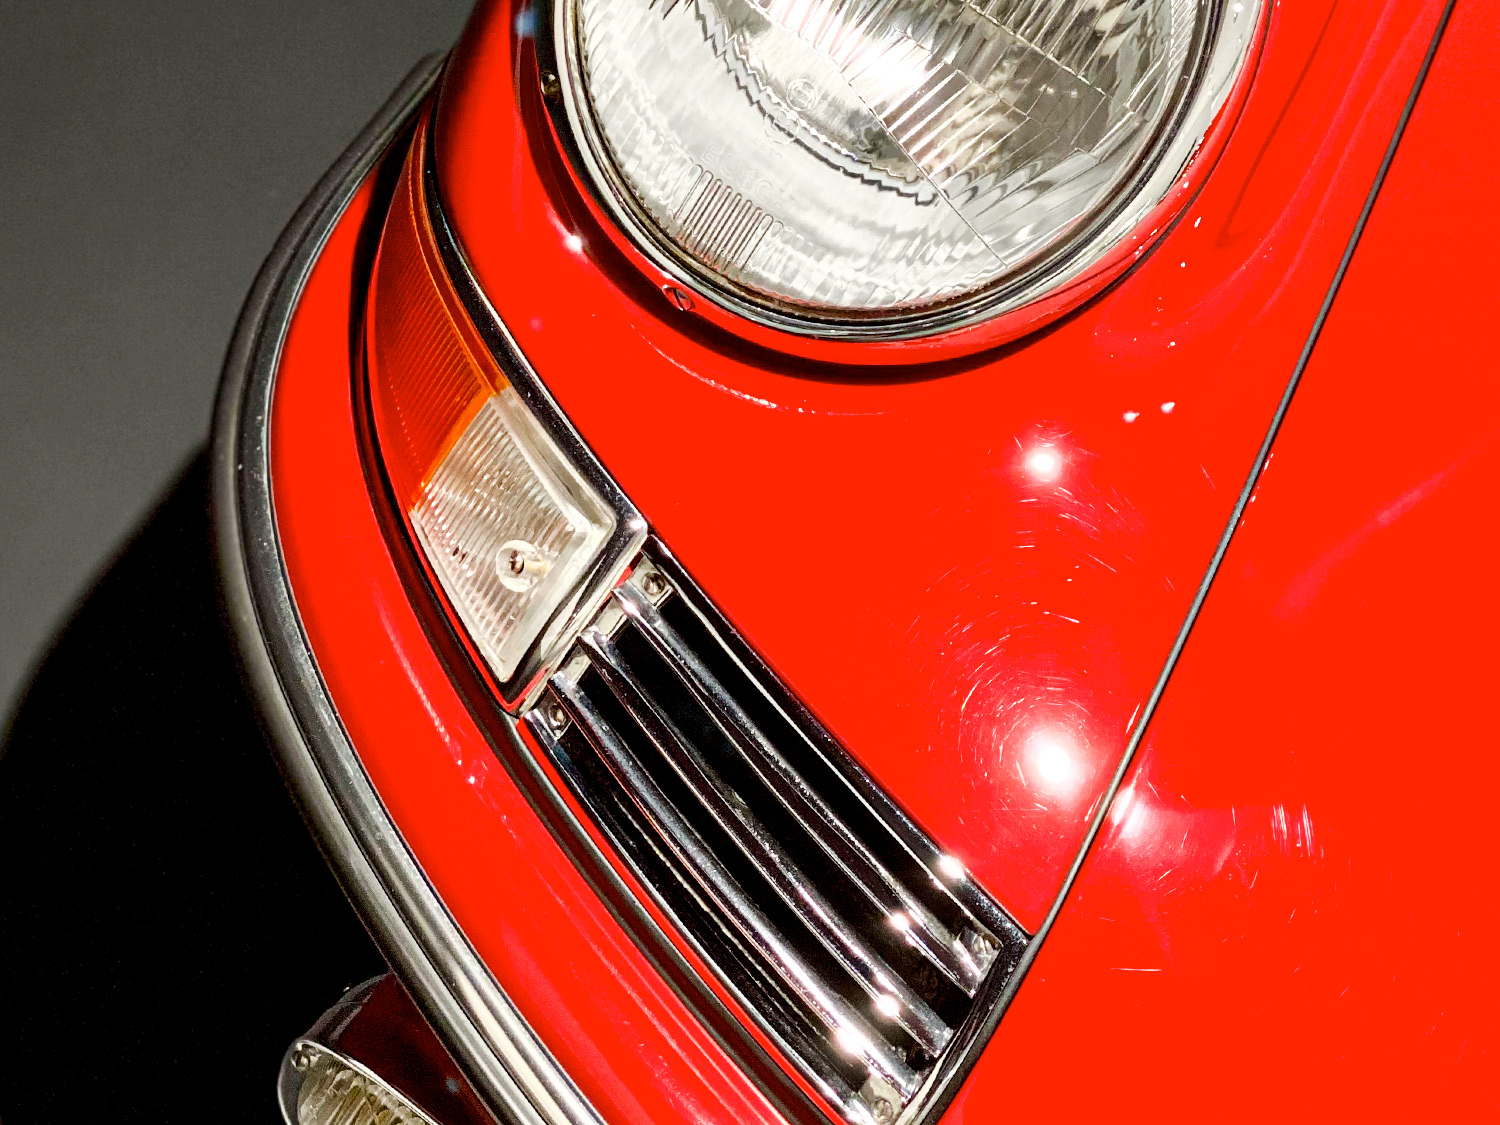 Photography at the Porsche Museum